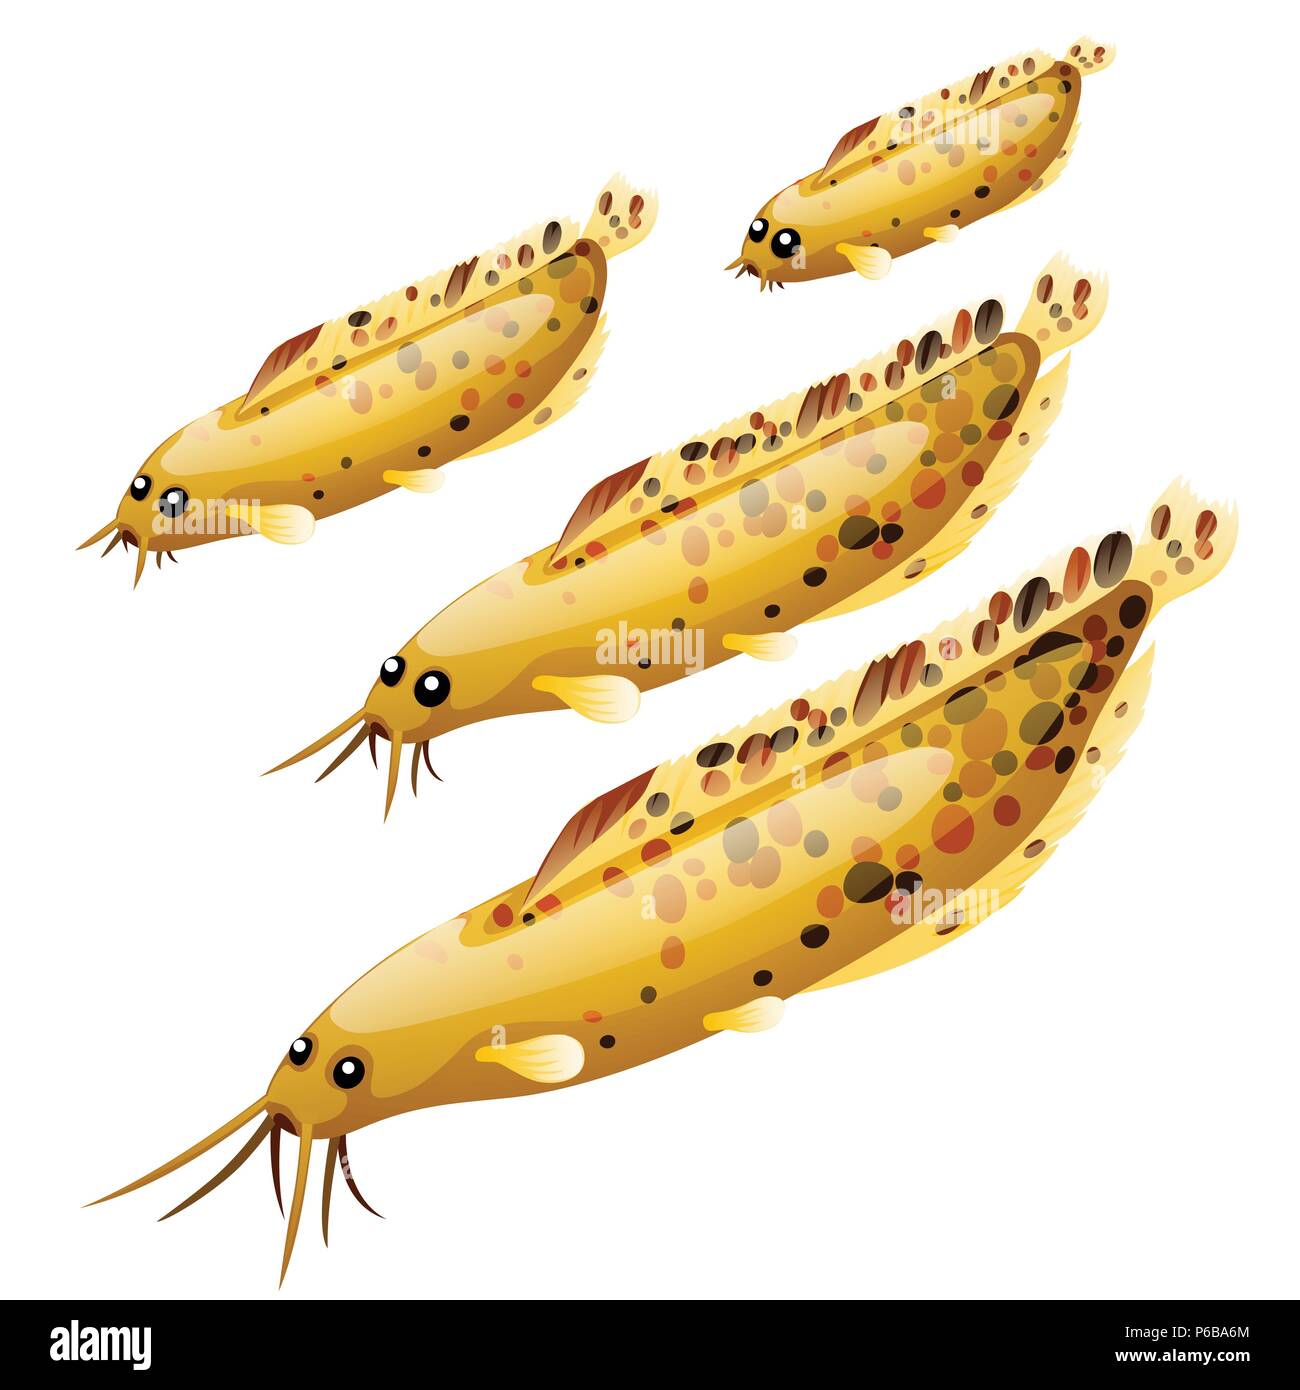 Set of cartoon fish isolated on white background. Vector cartoon close-up illustration. Stock Vector